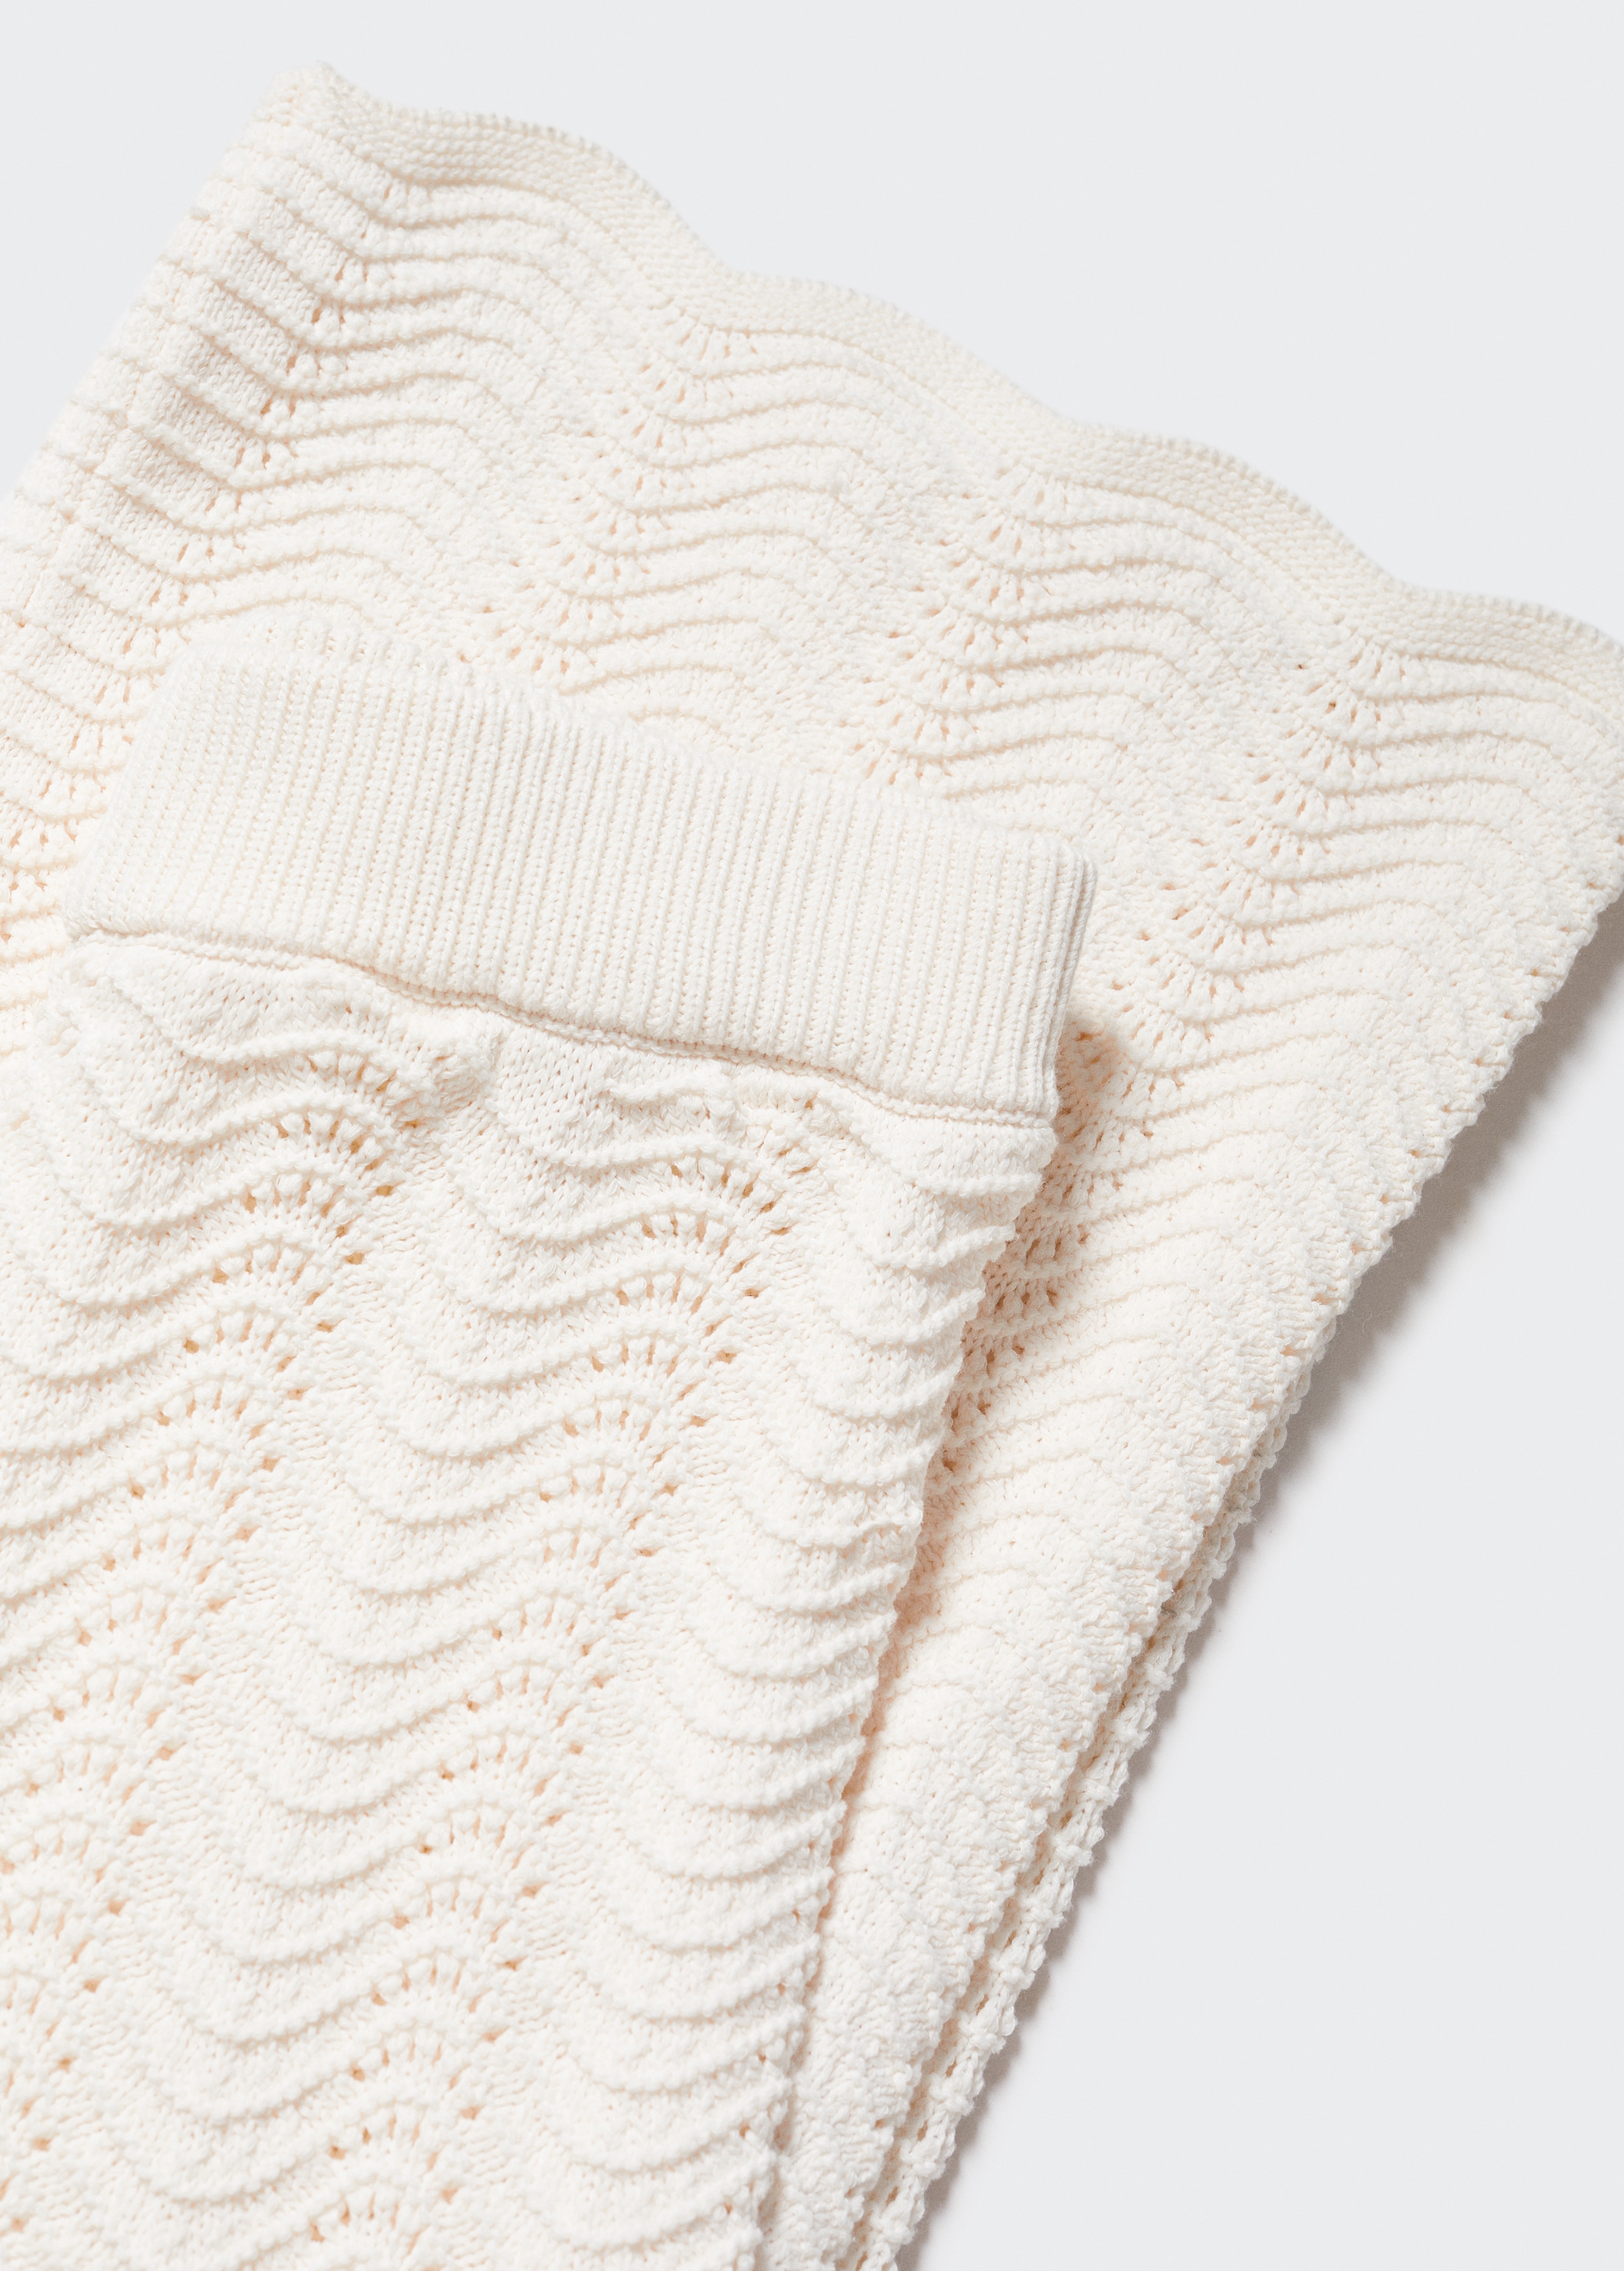 Openwork knit pants - Details of the article 8